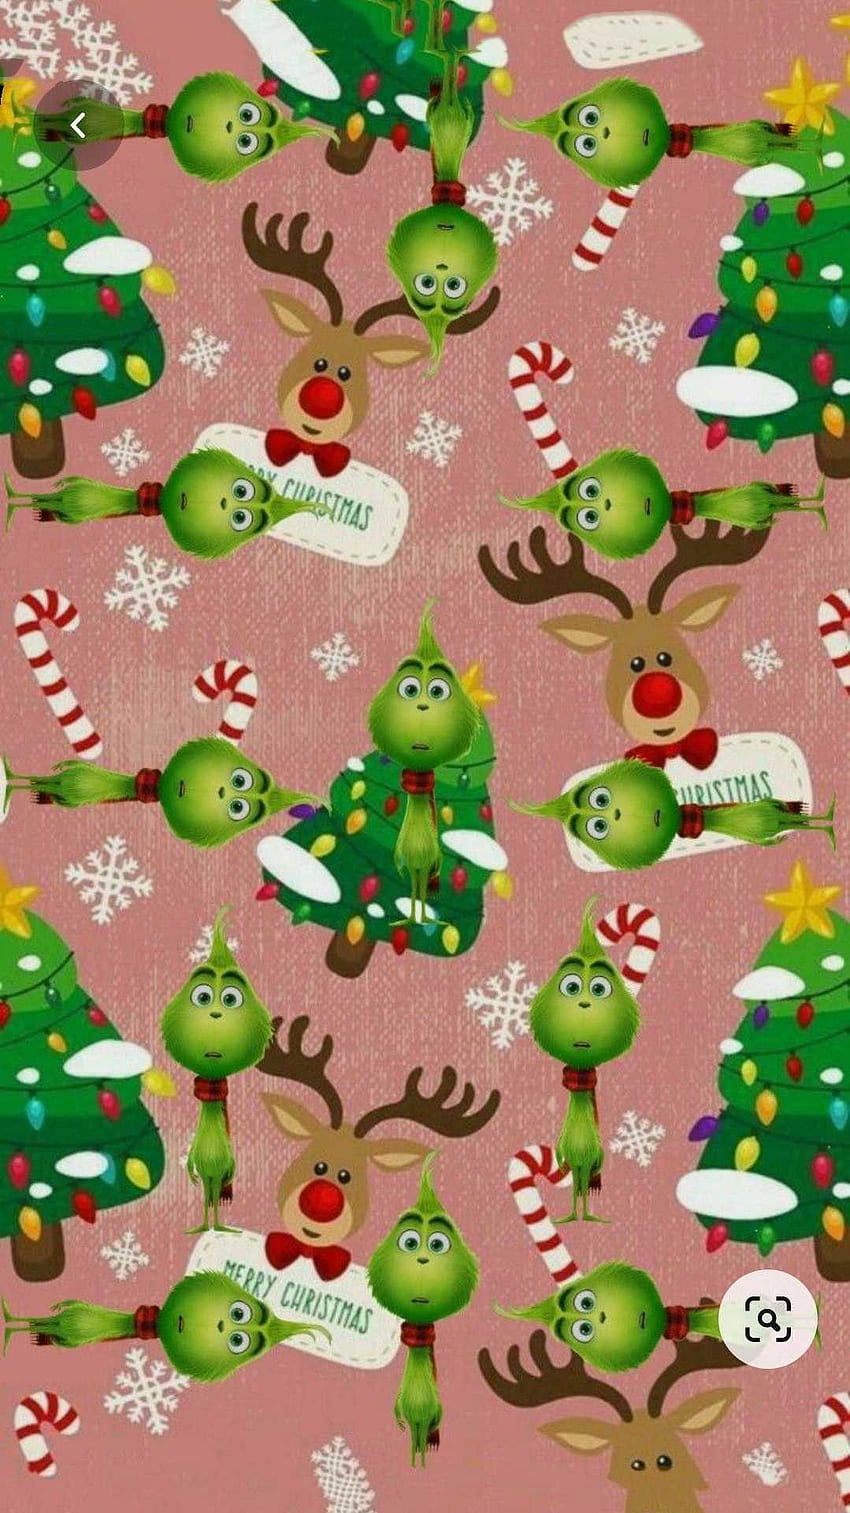 Buy App Icons Grinch Iphone App Icons Grinchmas App Icons Online in India   Etsy